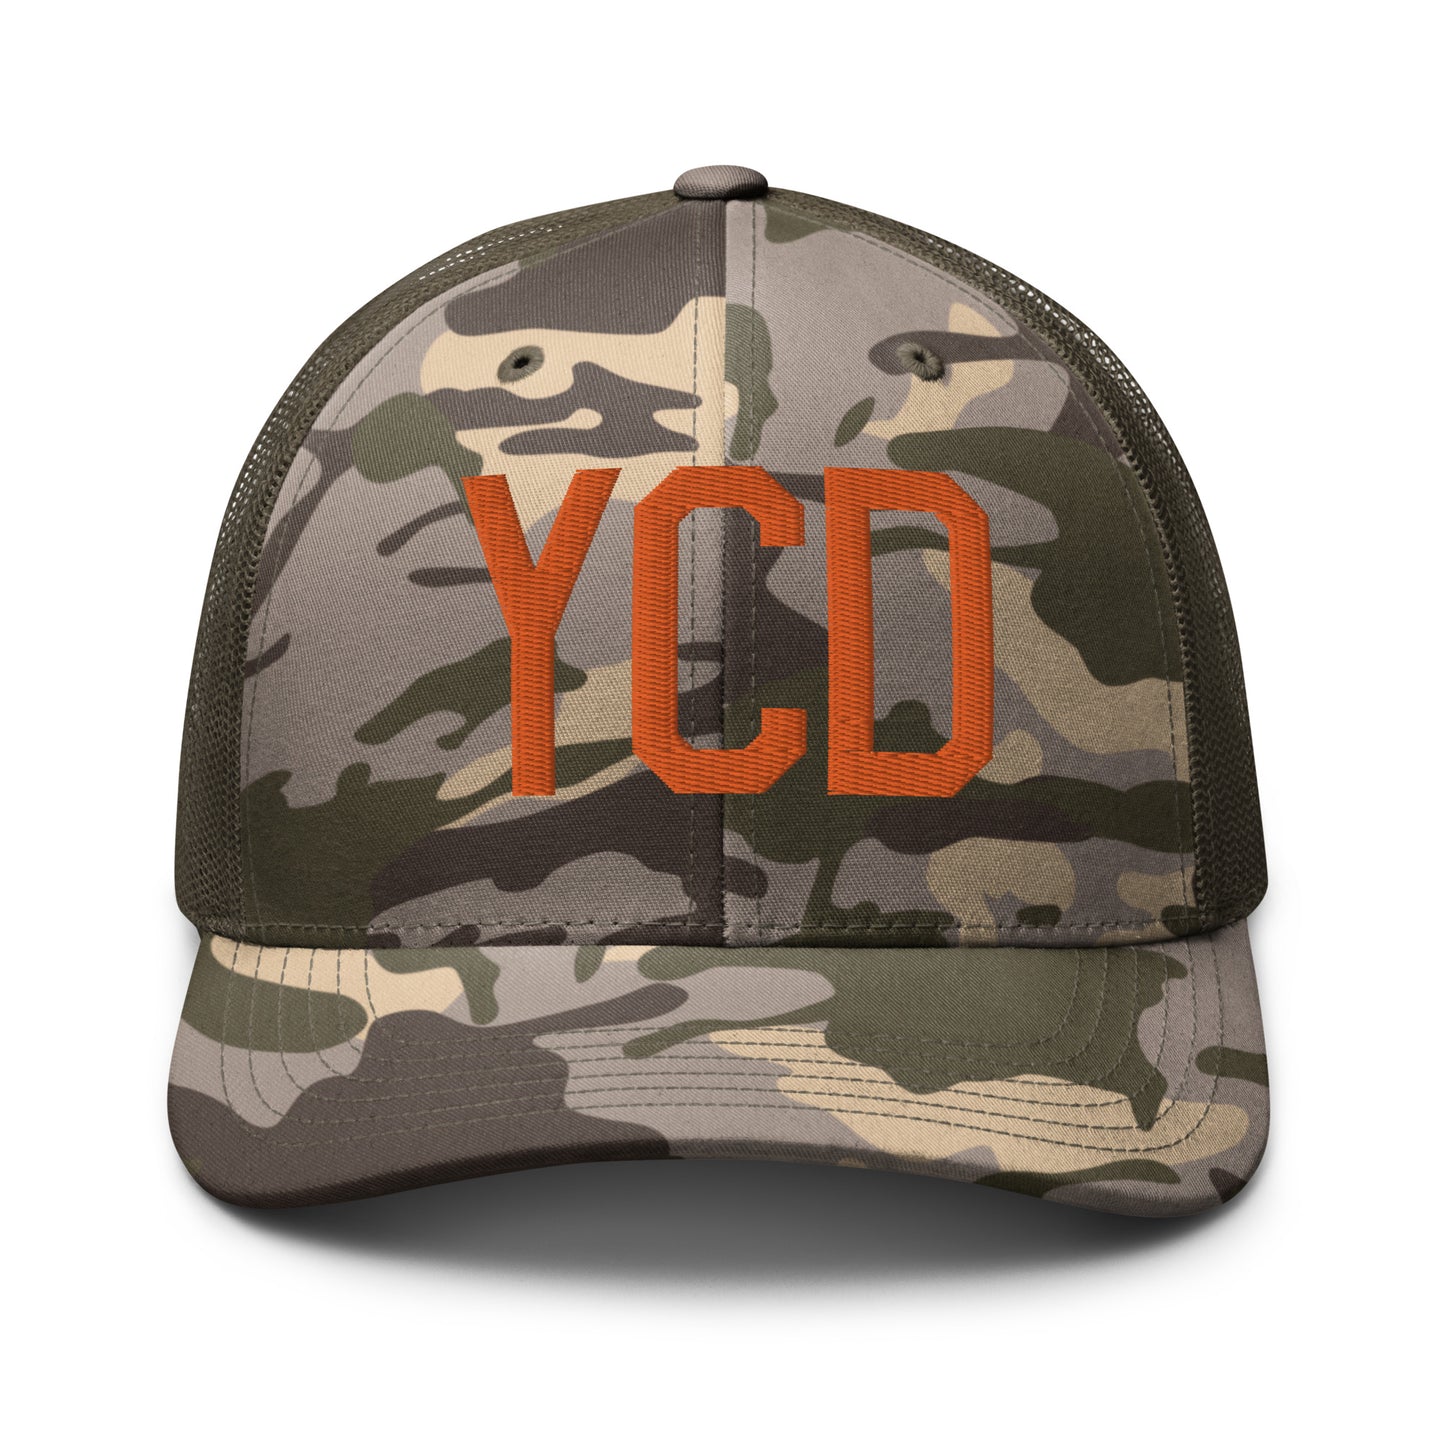 Airport Code Camouflage Trucker Hat - Orange • YCD Nanaimo • YHM Designs - Image 17